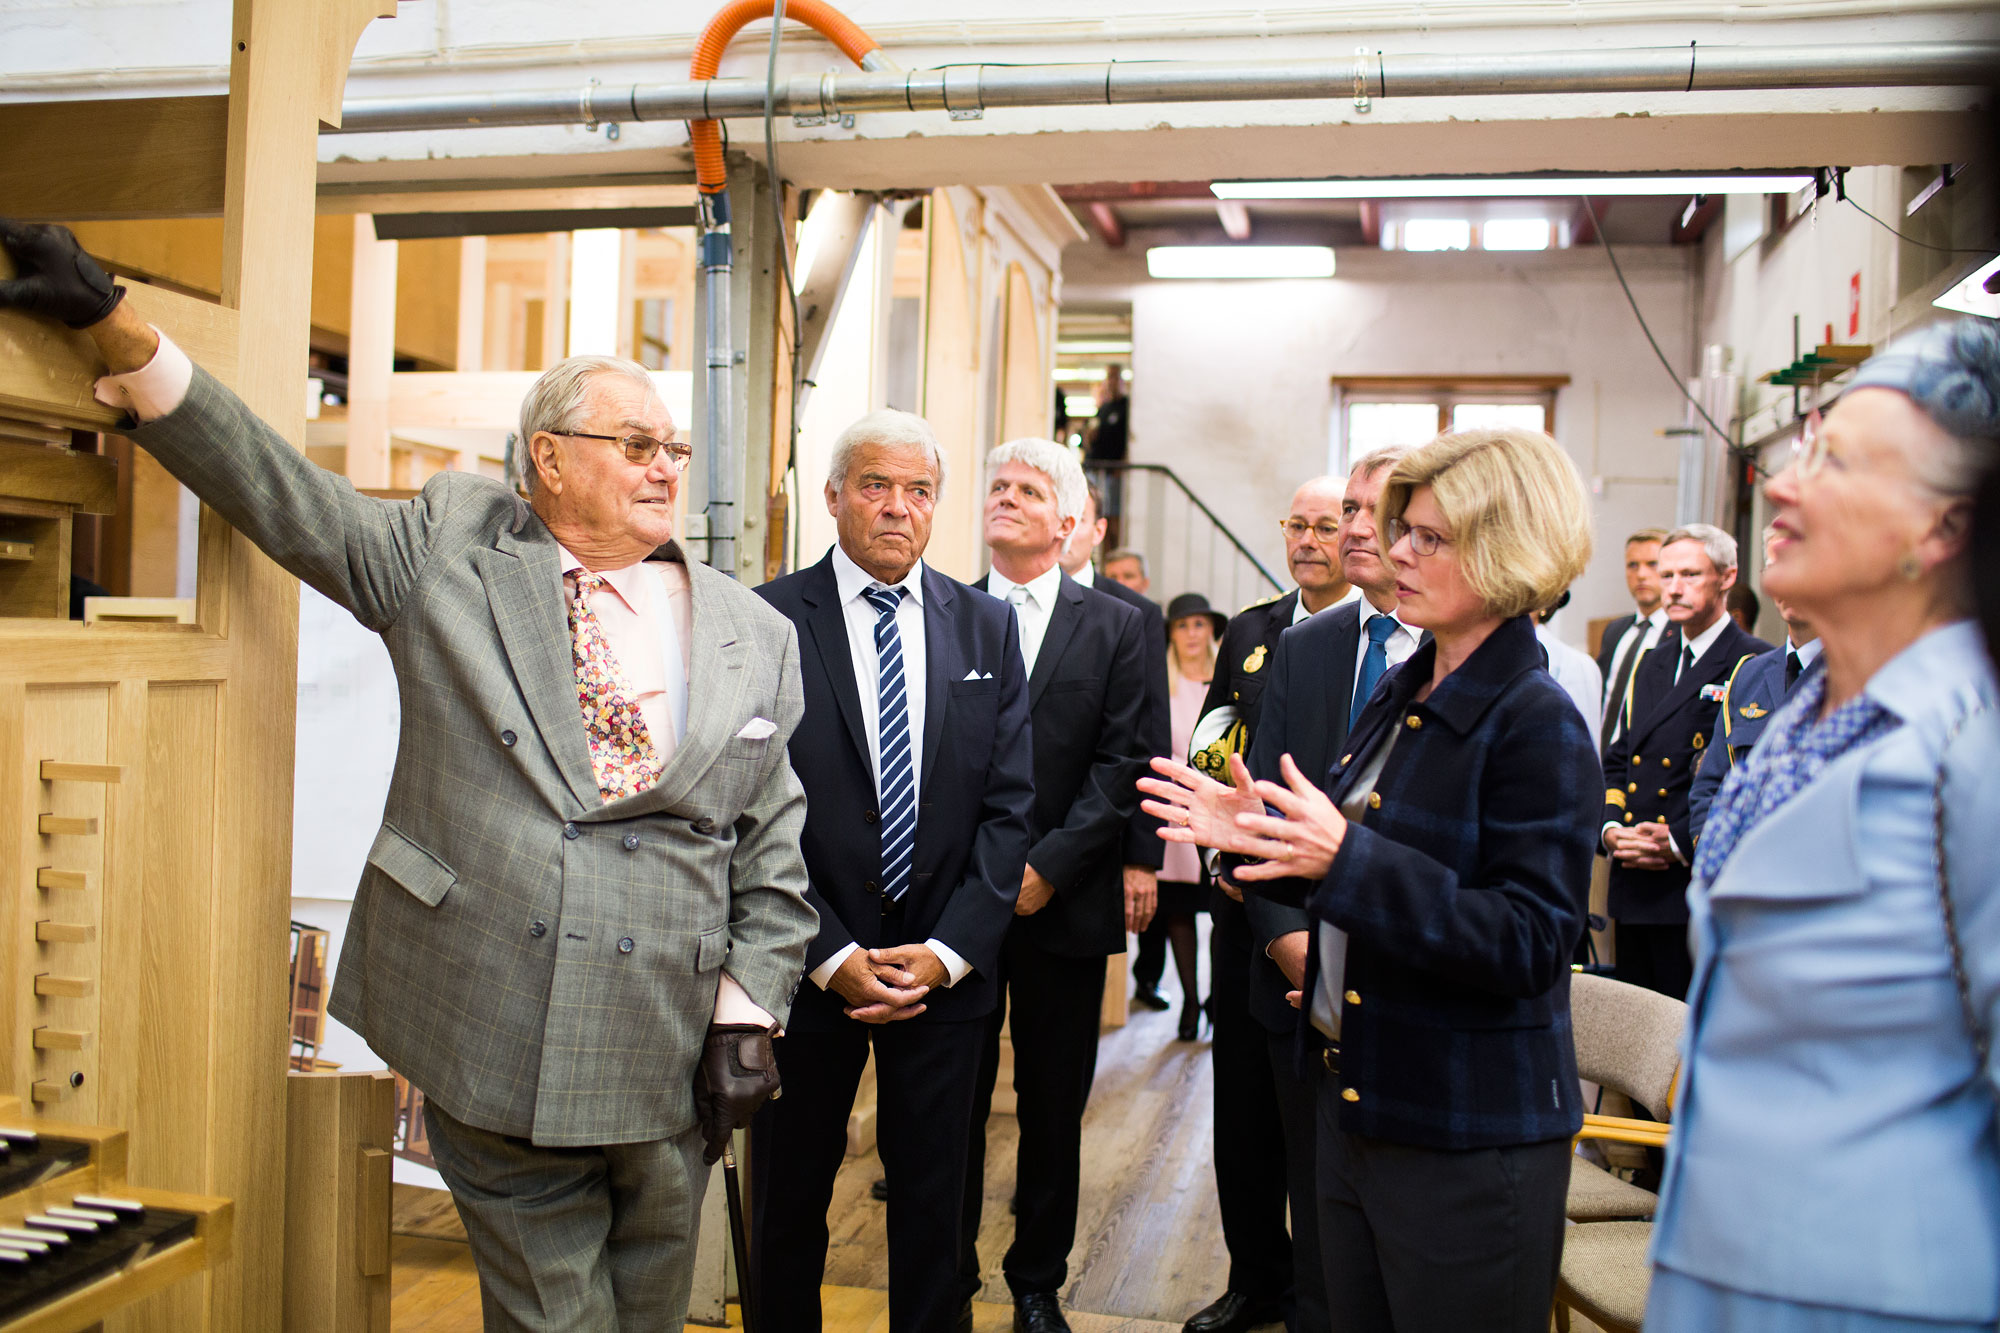 HM The Queen Margrethe and Prince Henrik visits Marcussen & Søn